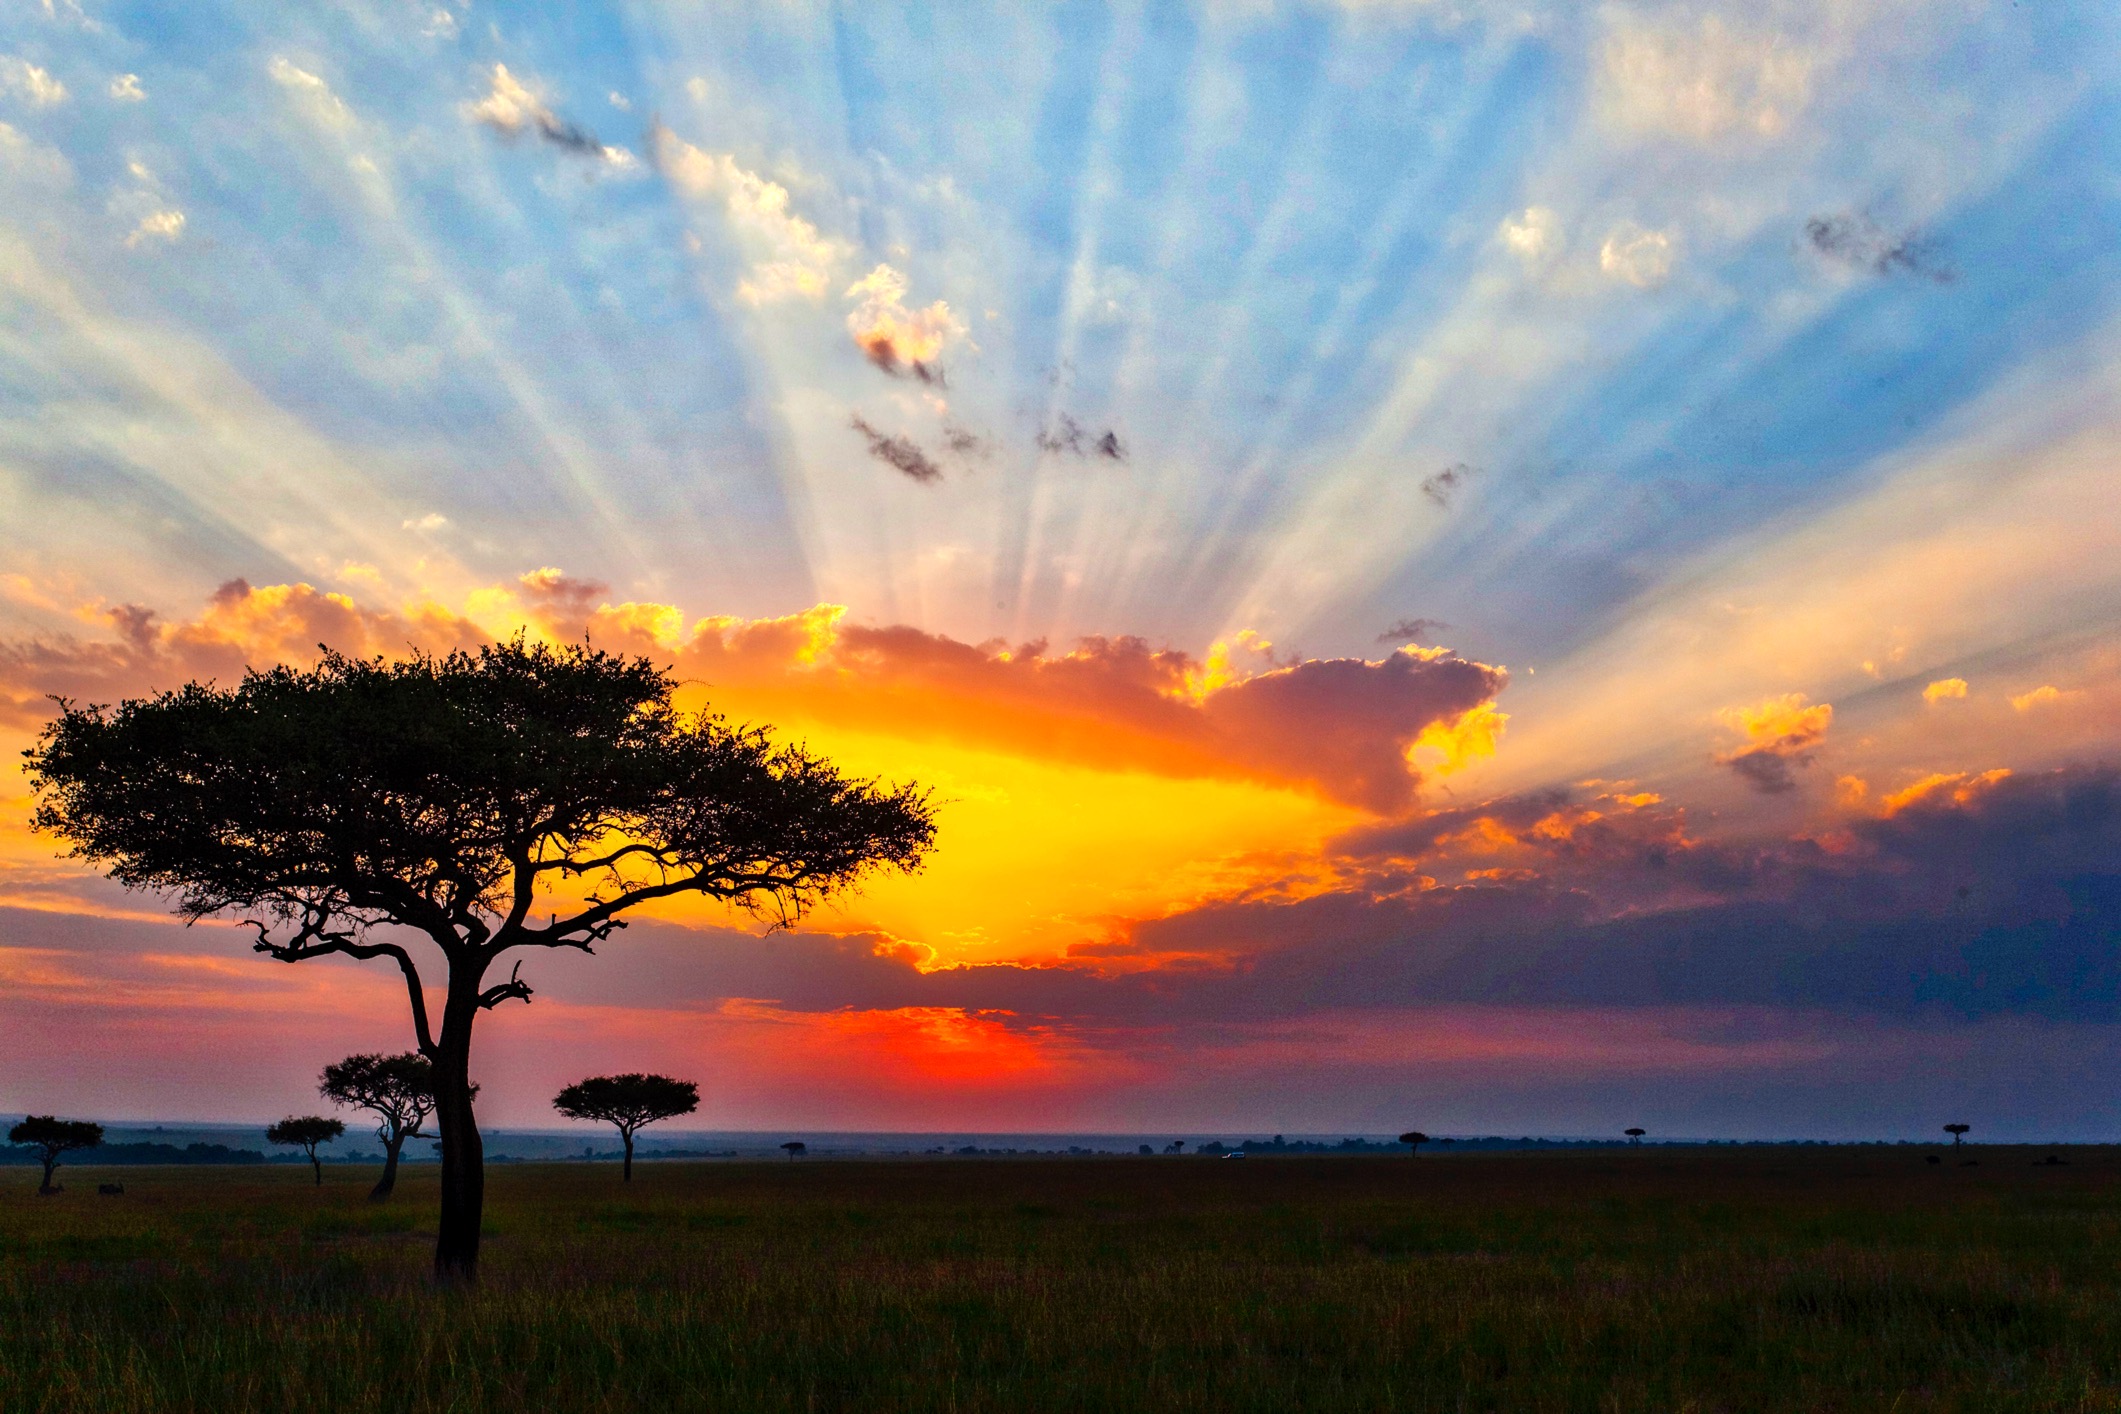 Acacia trees at sunset in the African savanna - Themba Tutors